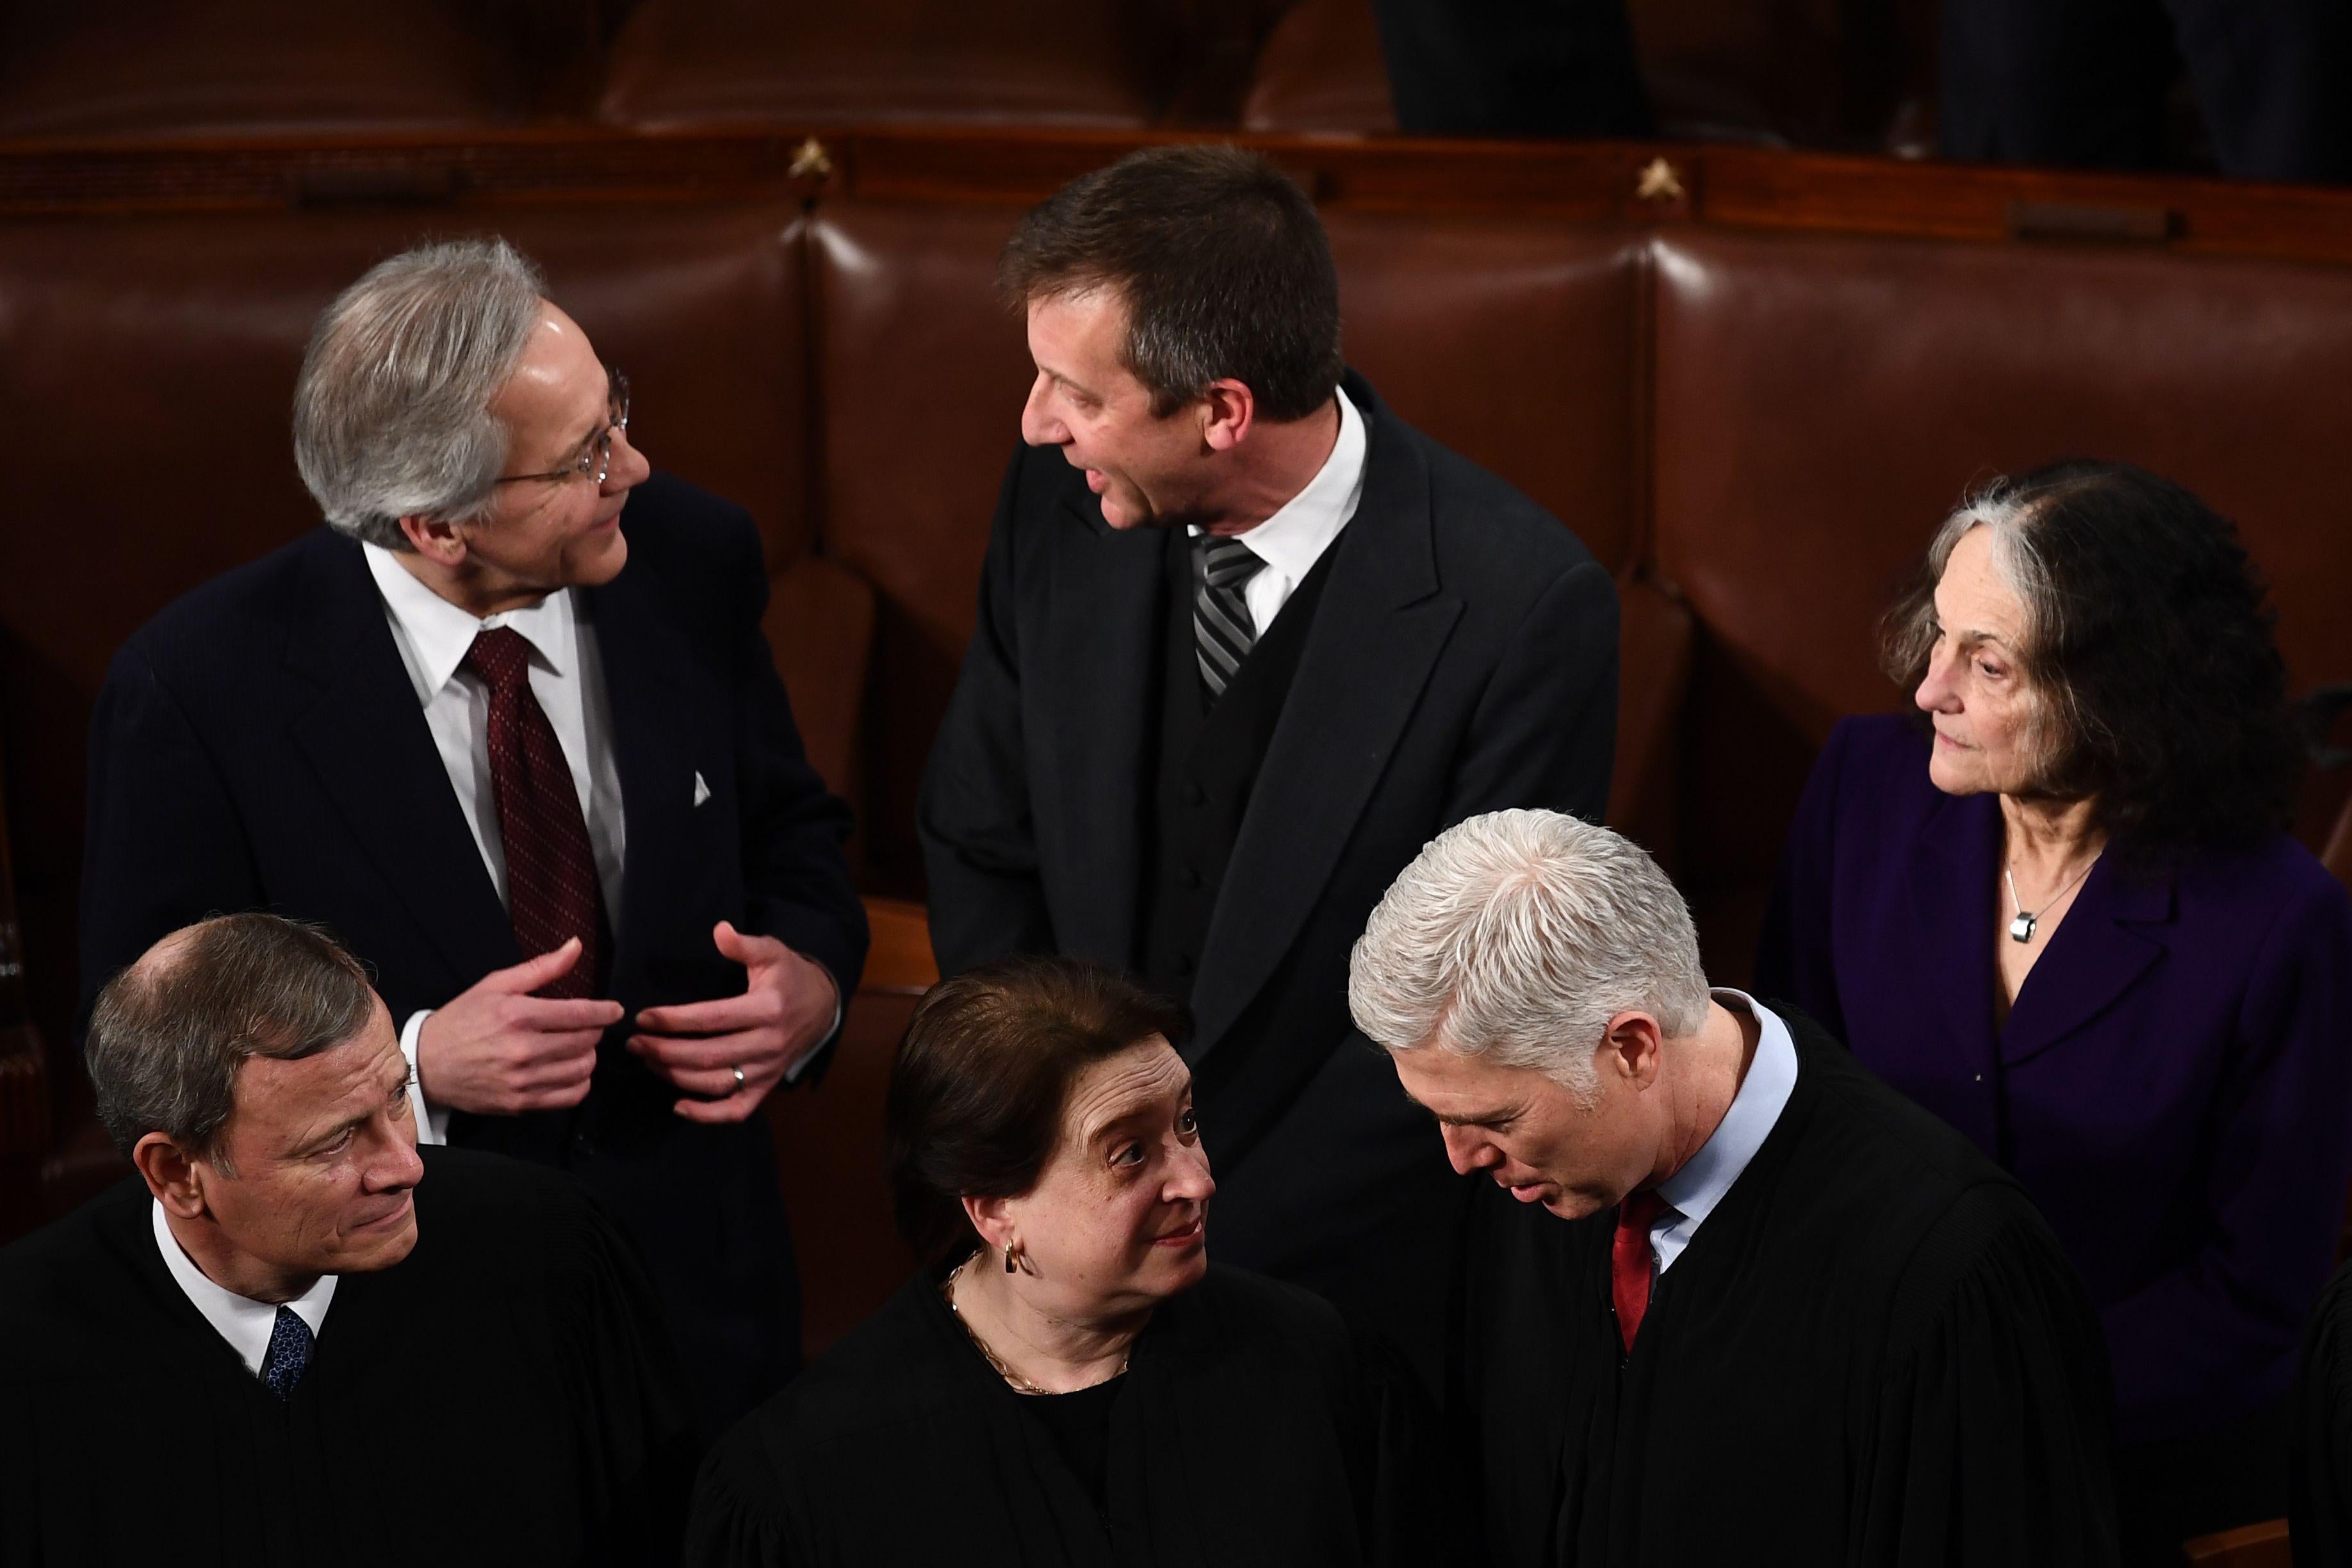 Kagan speaks to Gorsuch as Roberts looks on